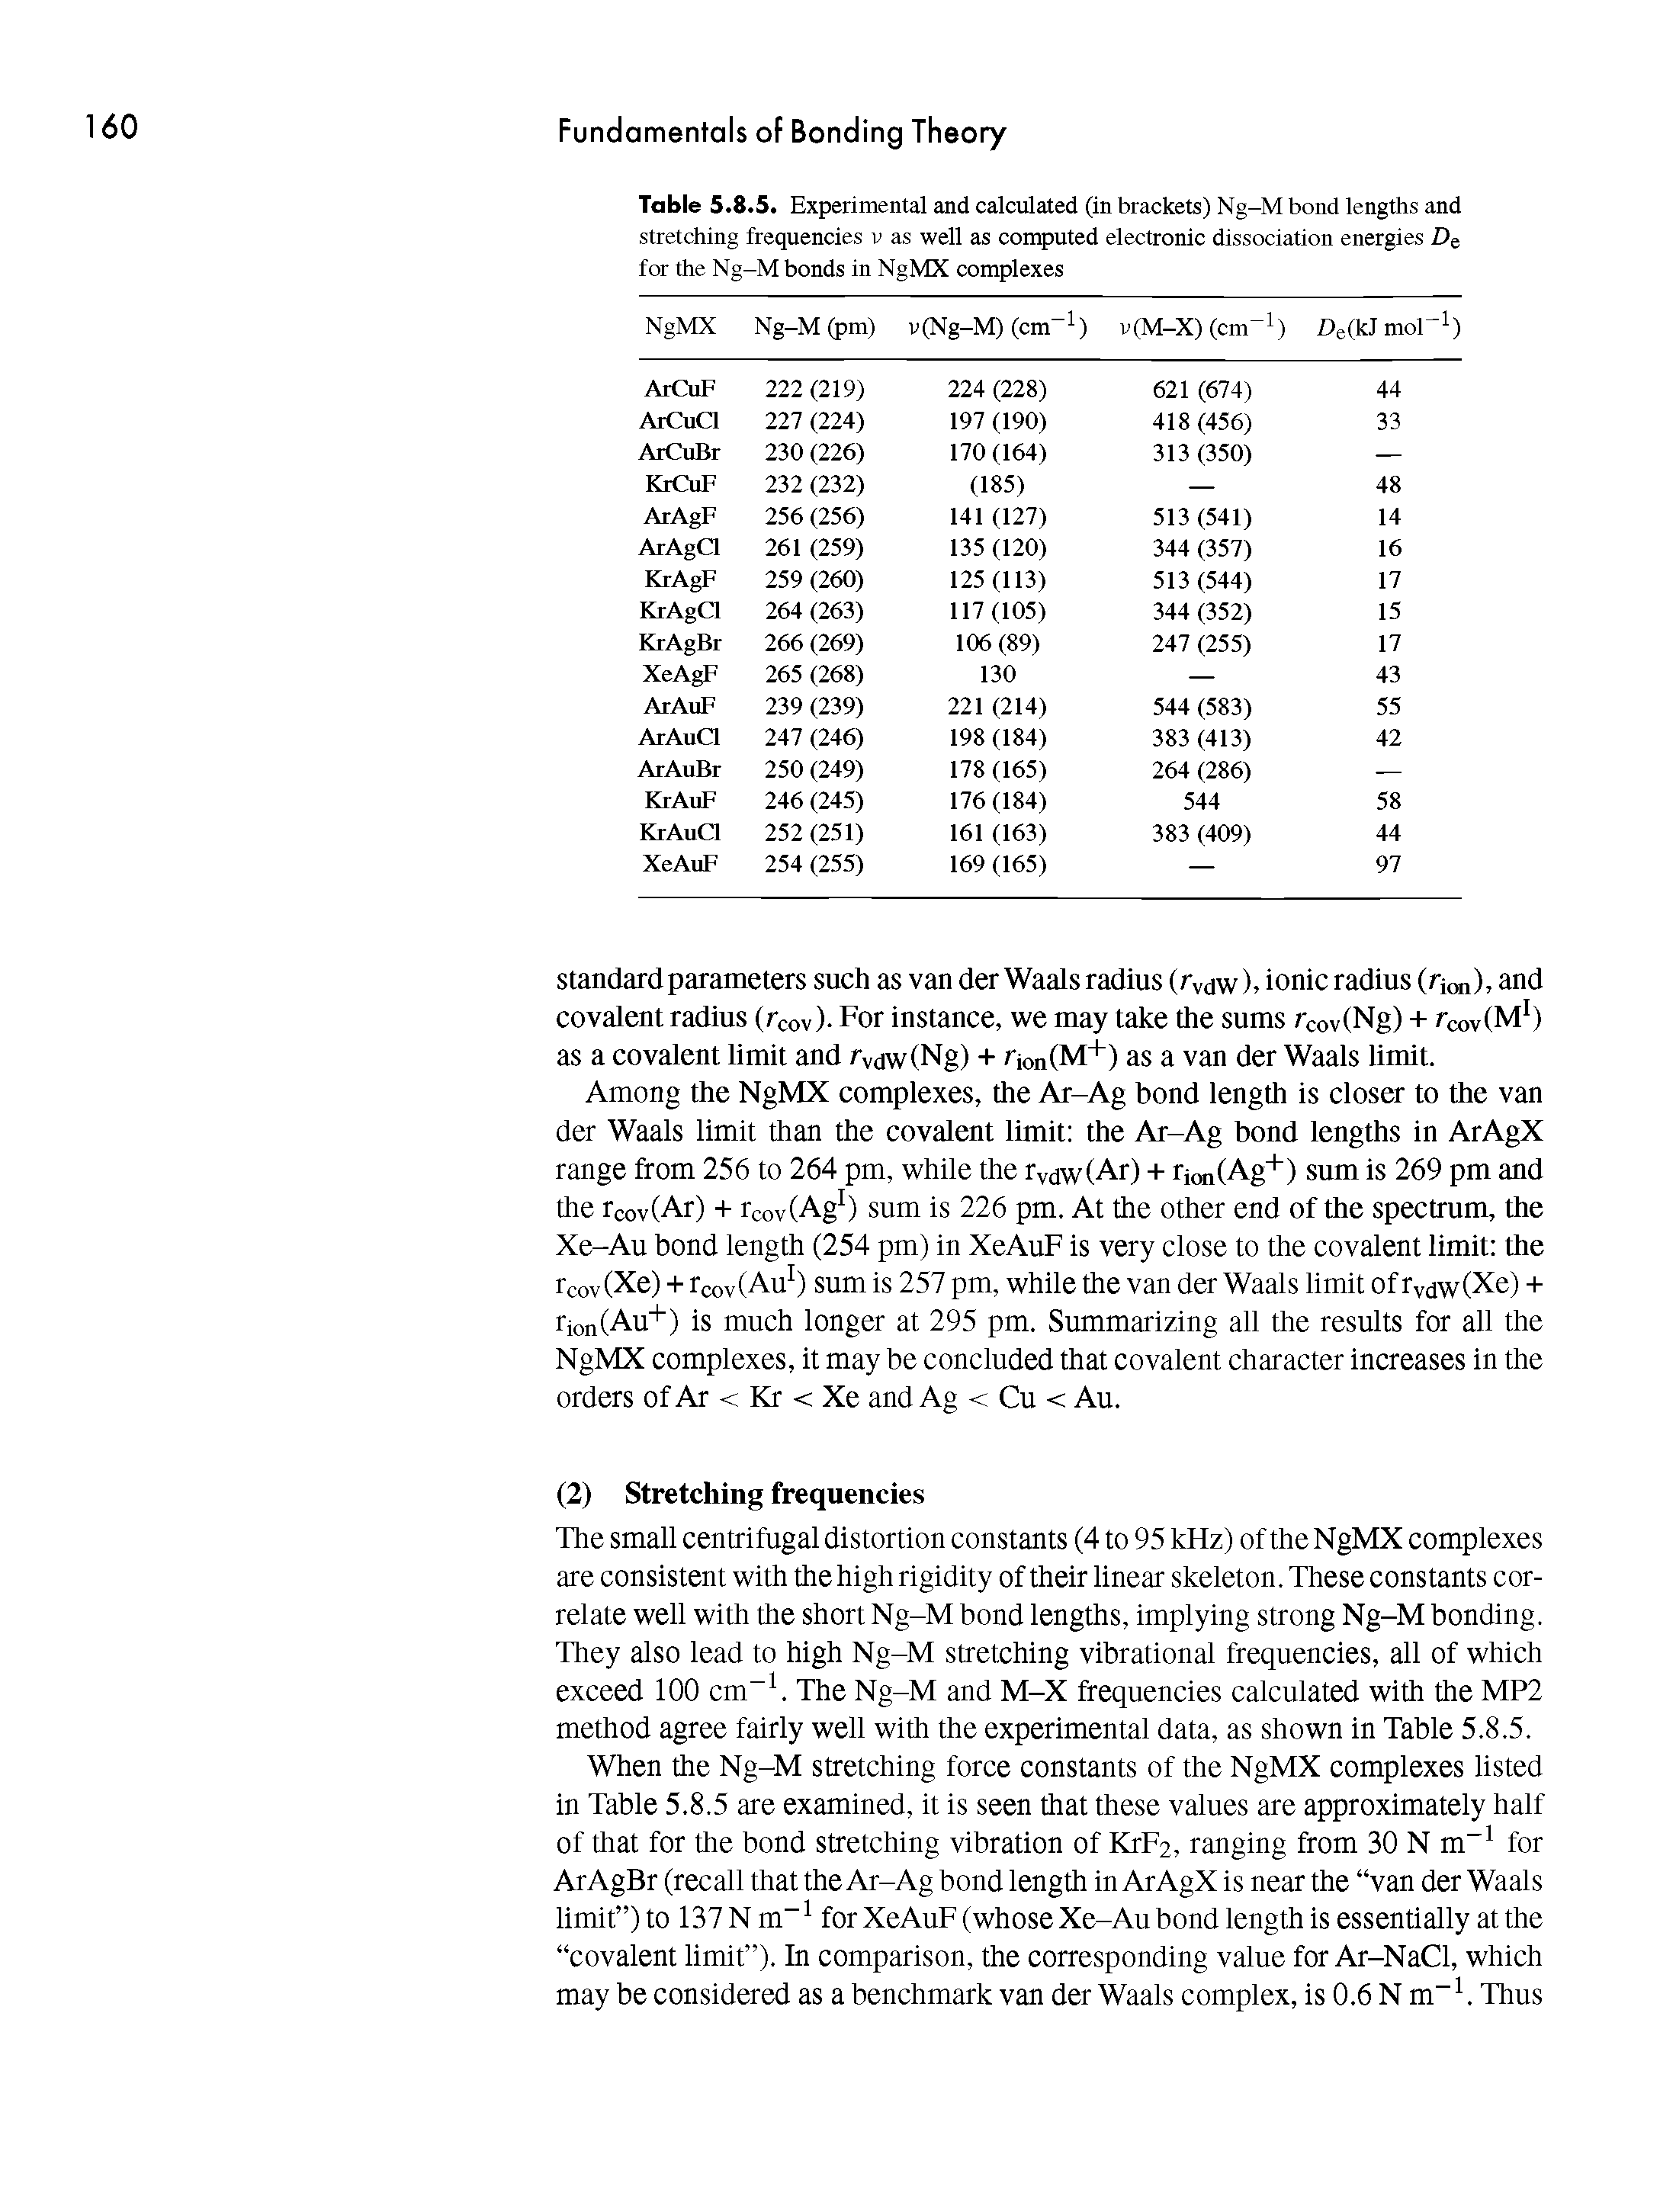 Table 5.8.5. Experimental and calculated (in brackets) Ng-M bond lengths and stretching frequencies v as well as computed electronic dissociation energies De for the Ng-M bonds in NgMX complexes...